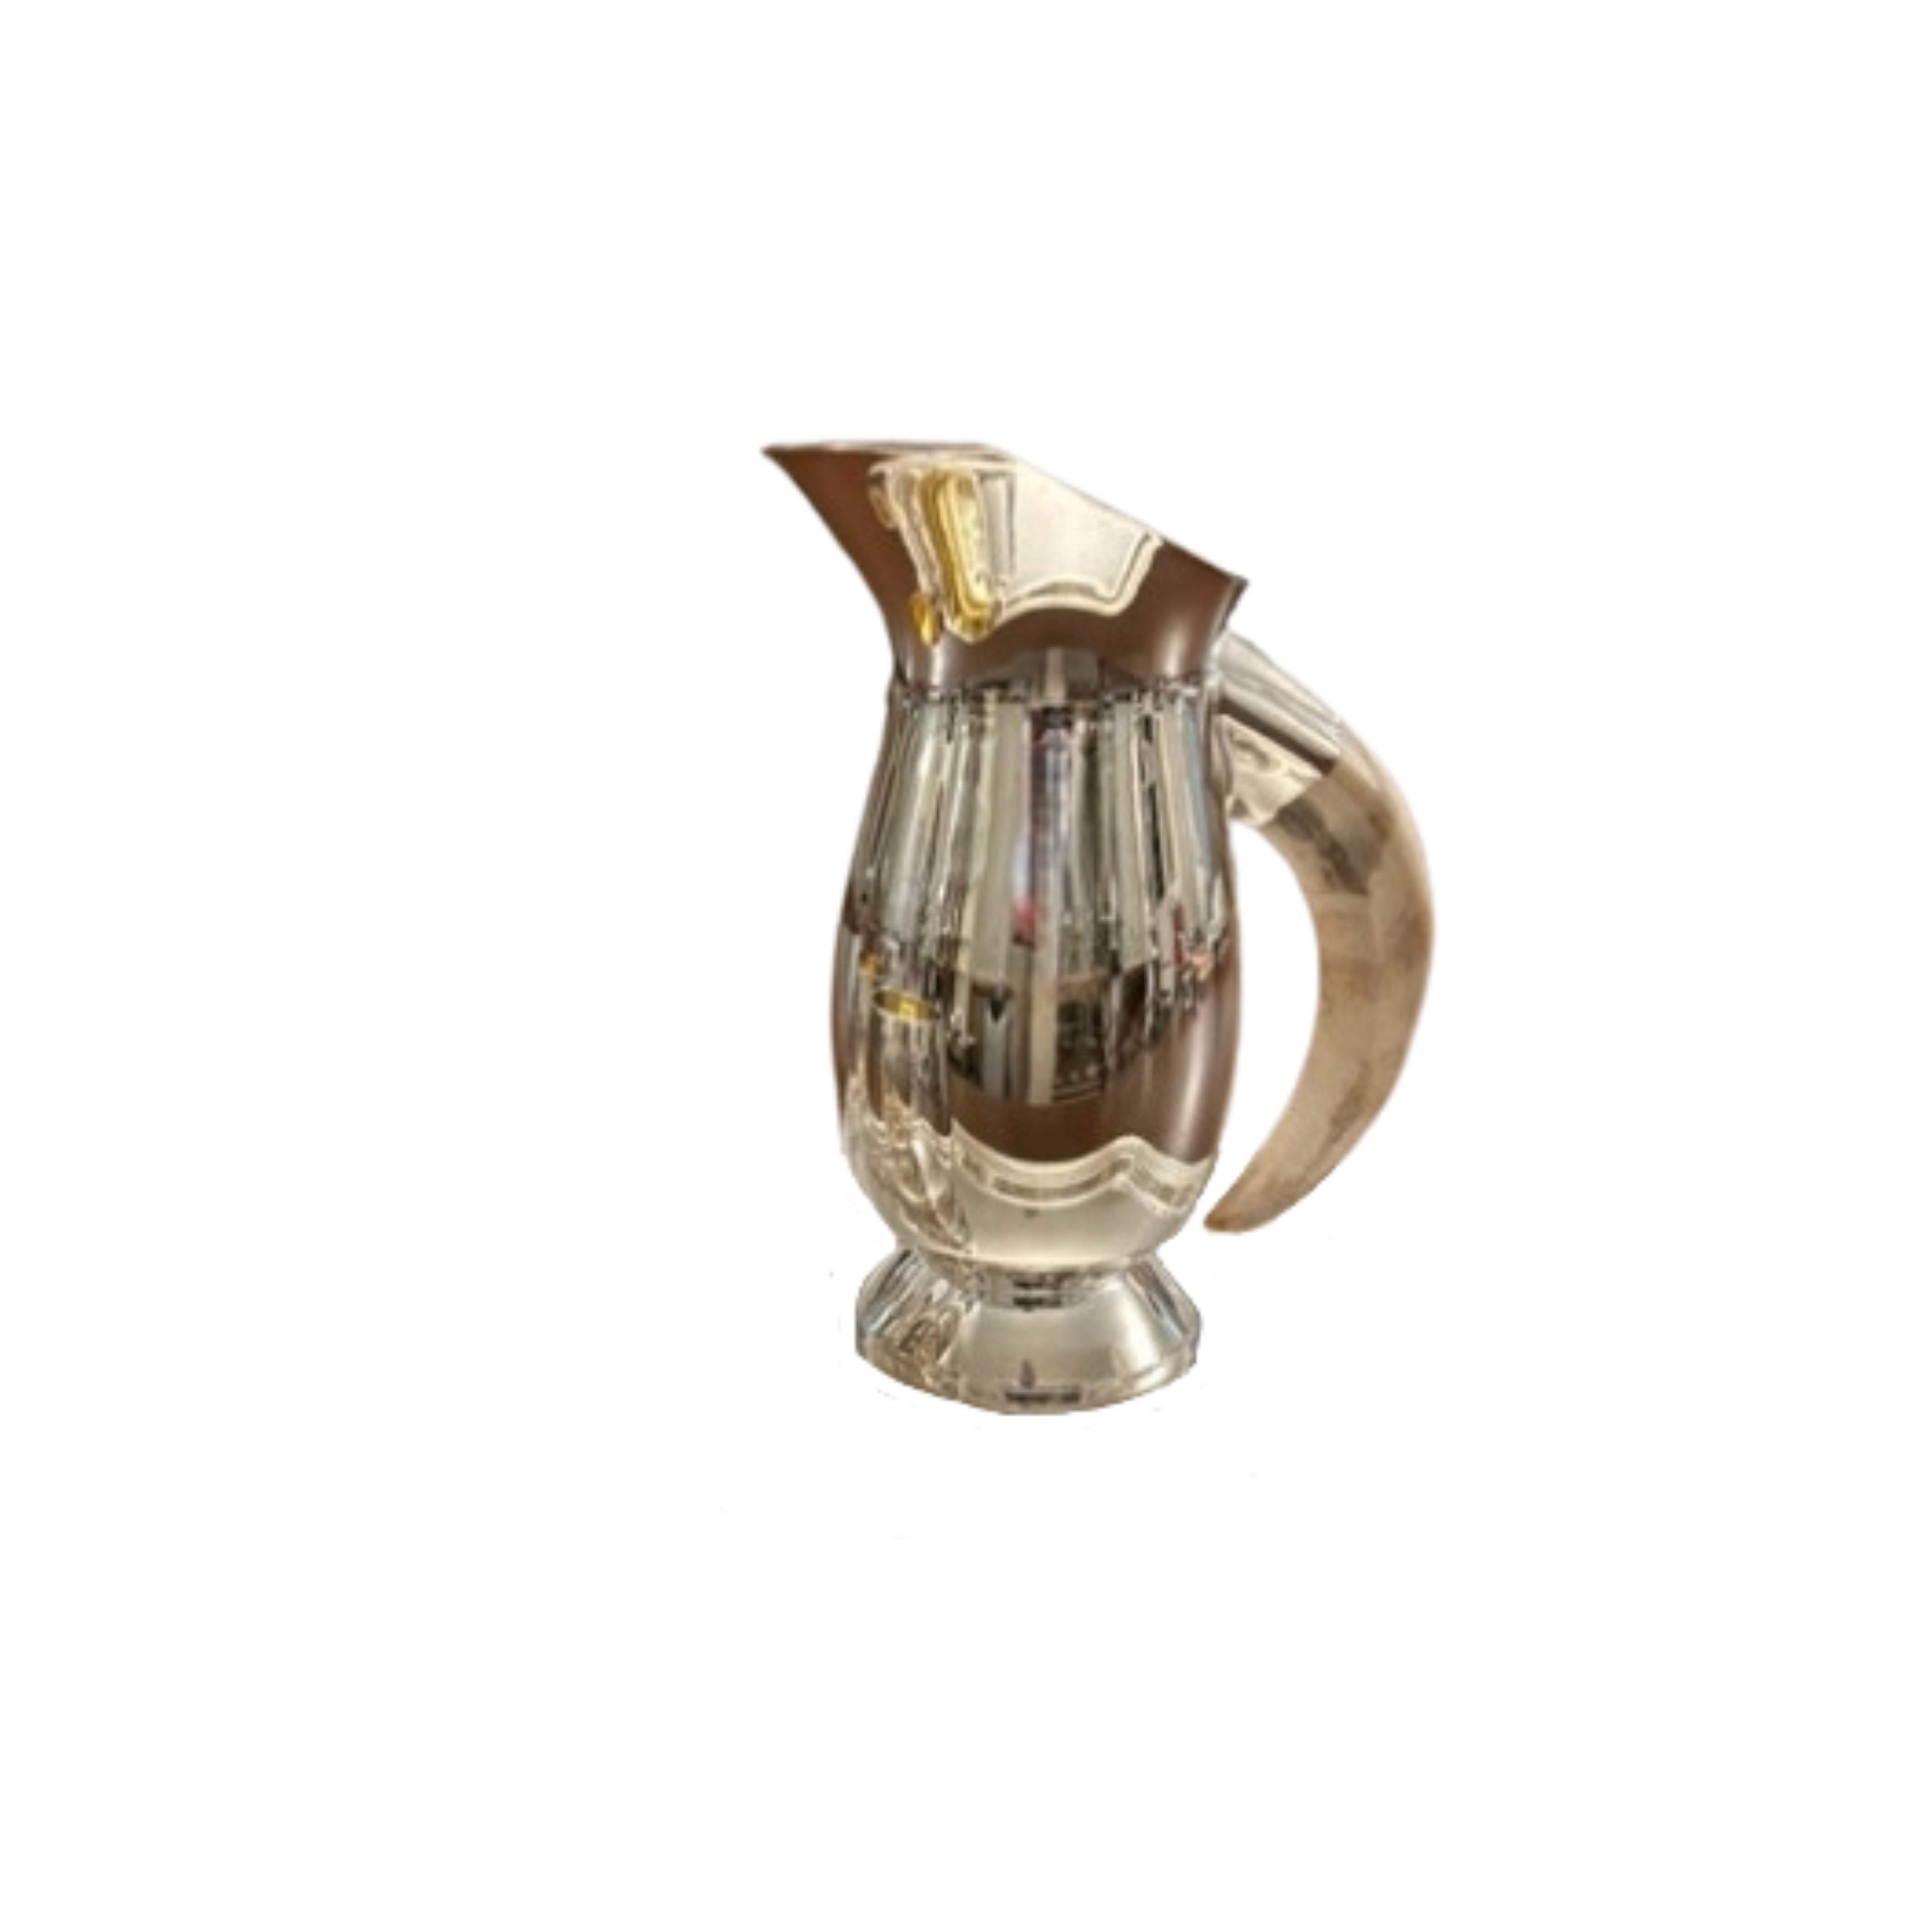 Silver plated pitcher with warthog tusk handle